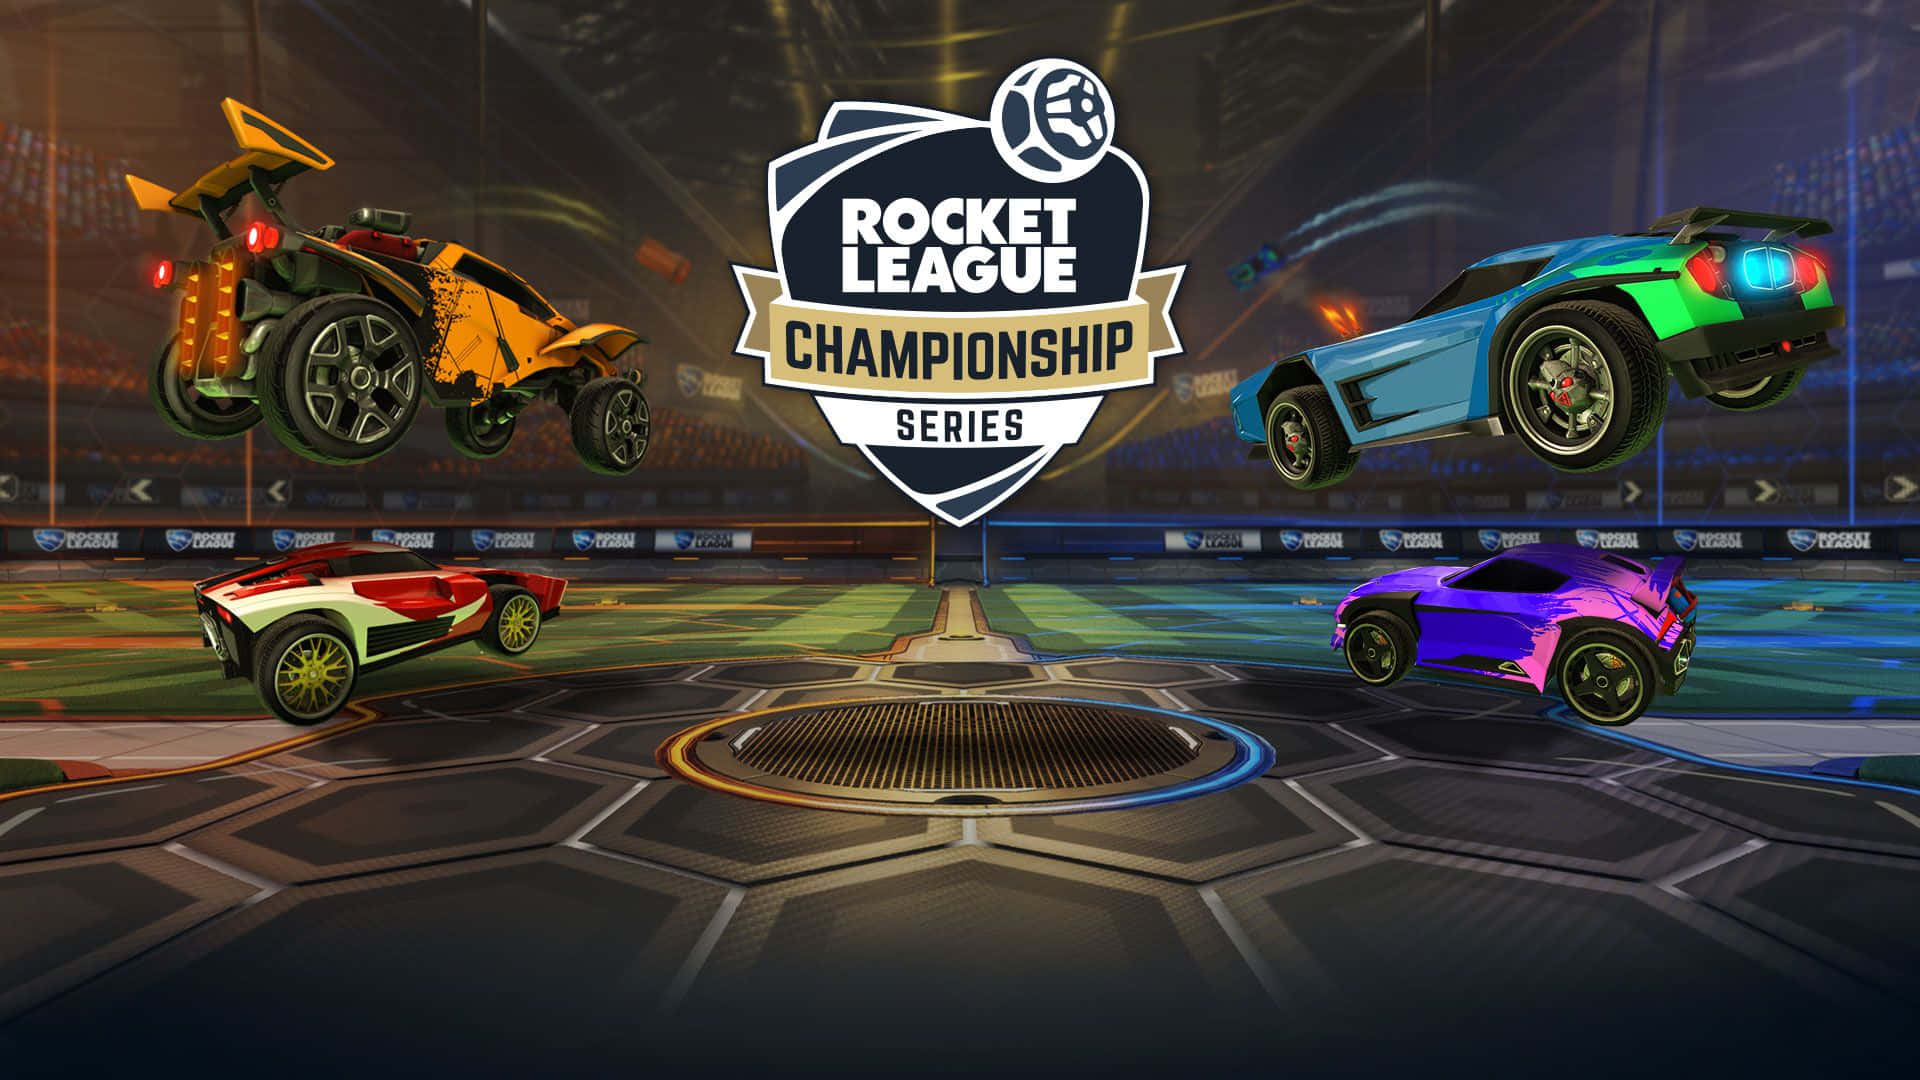 Creatively face off in some epic Rocket League action